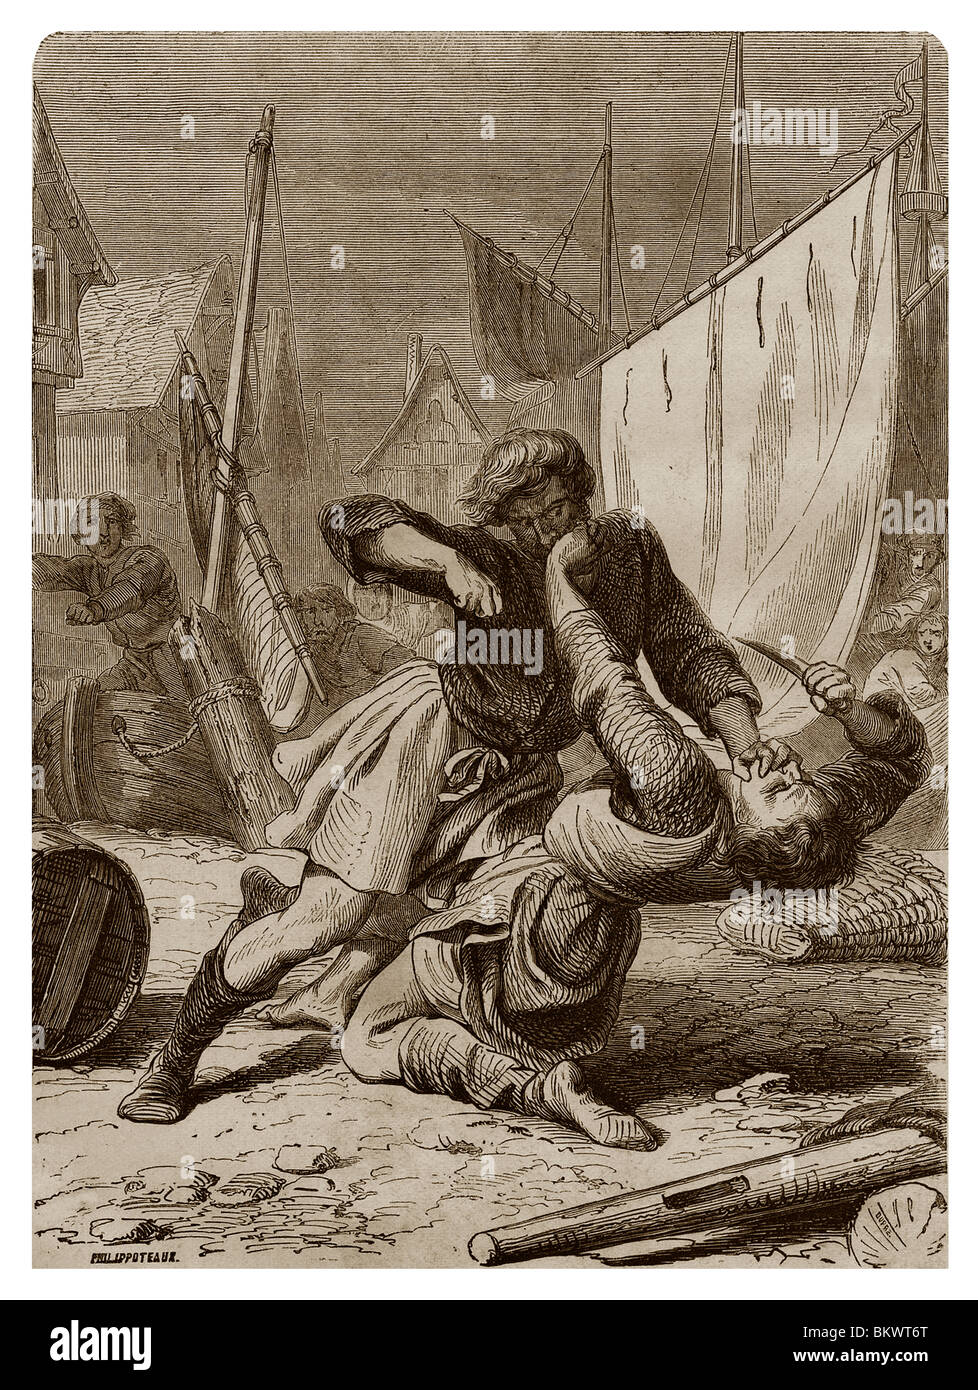 In 1293, in Bayonne, brawl between two sailors, the one Norman and the other Englishman. Stock Photo